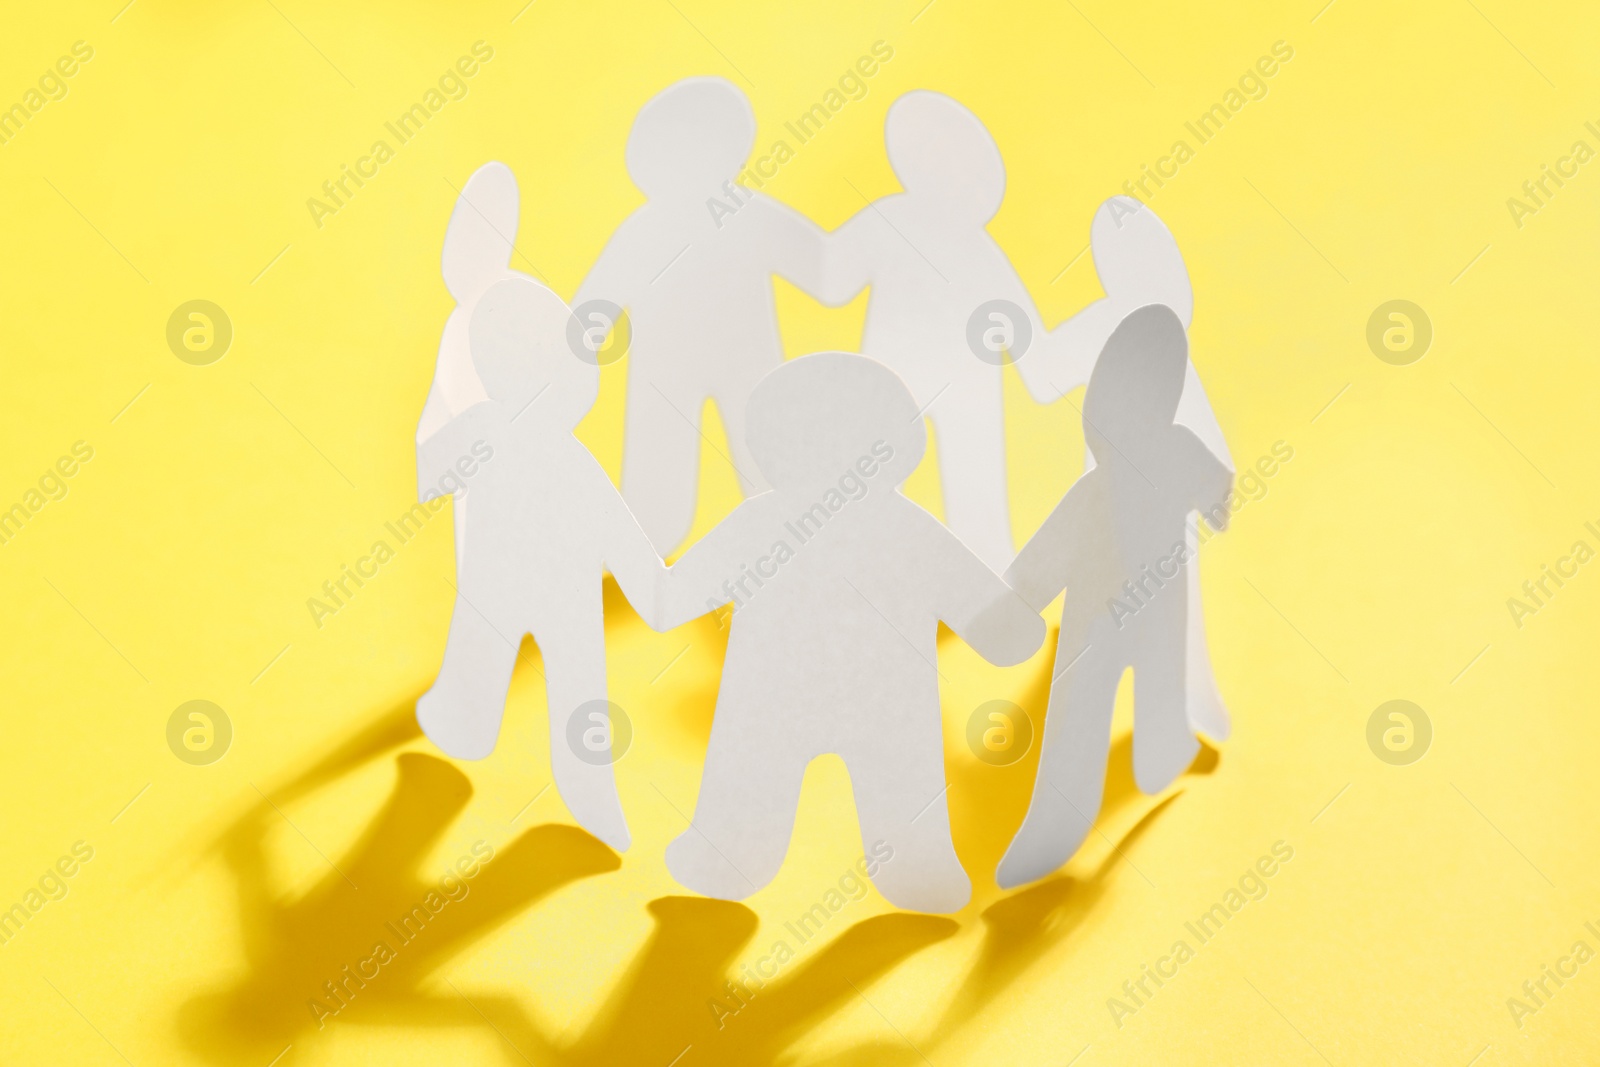 Photo of Paper people chain making circle on yellow background. Unity concept